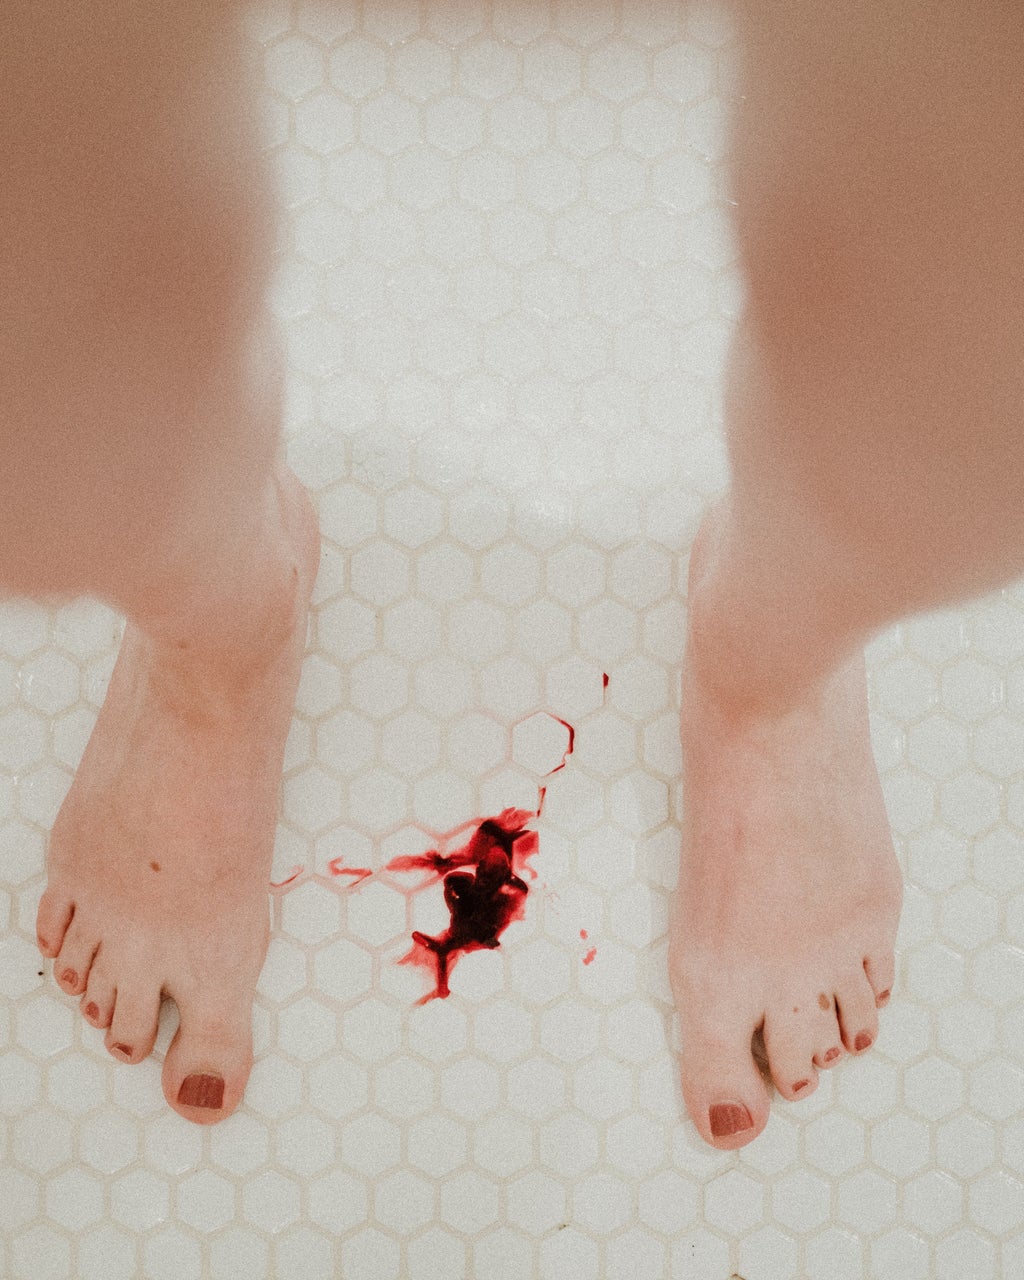 Feet standing in shower with blood on the floor